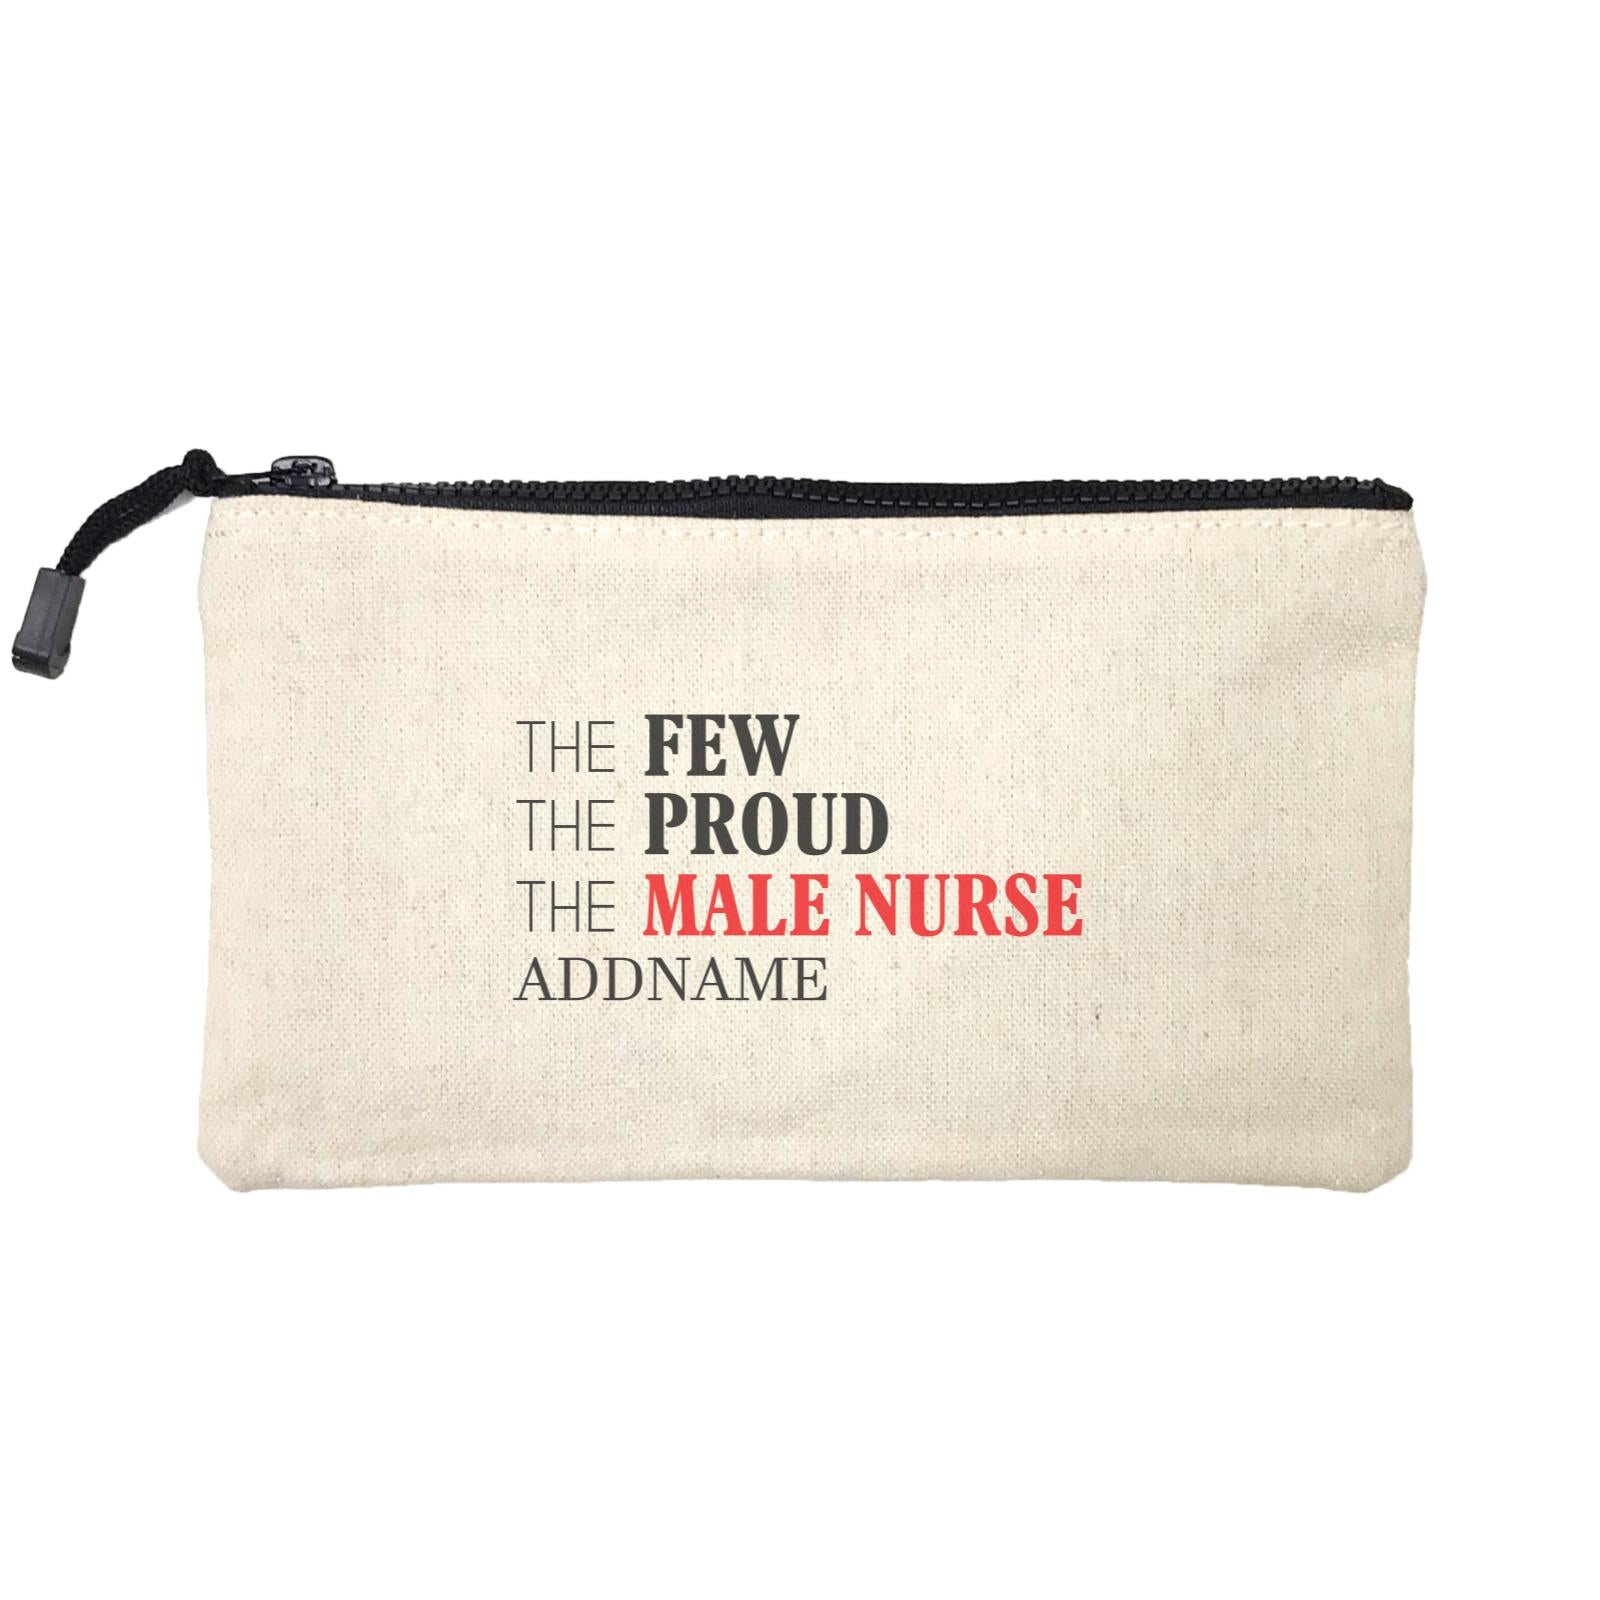 The Few, The Proud, The Male Nurse Mini Accessories Stationery Pouch